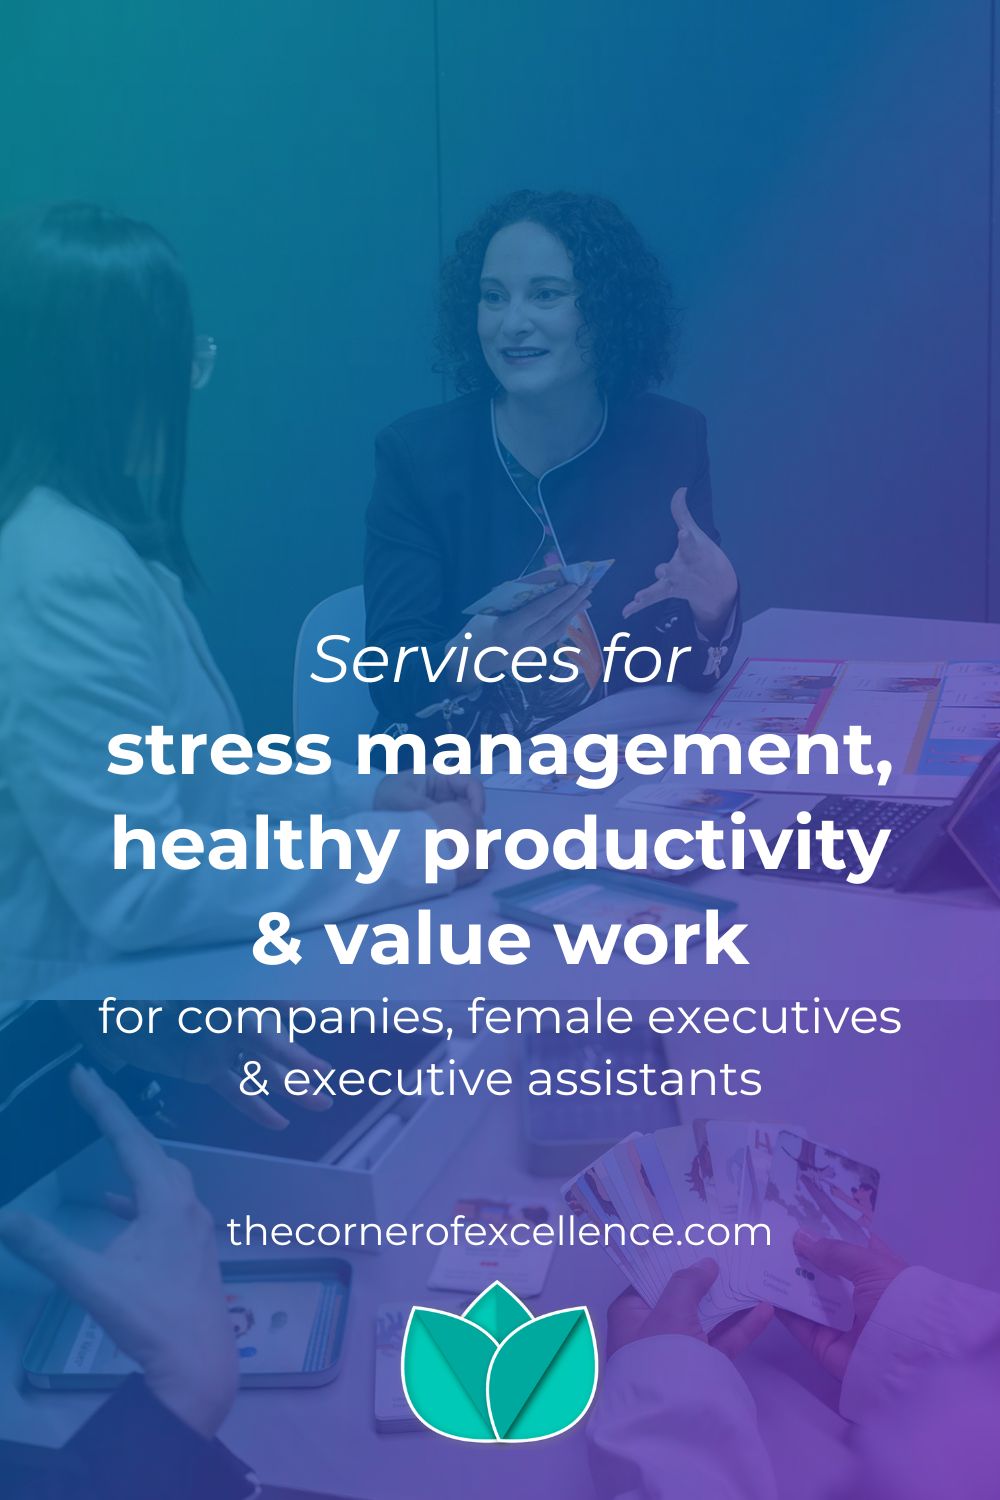 Services for stress management, healthy productivity & value work for companies, female executives & executive assistants Services Dorit Sauer mentor for self-leadership Services The Corner of Excellence